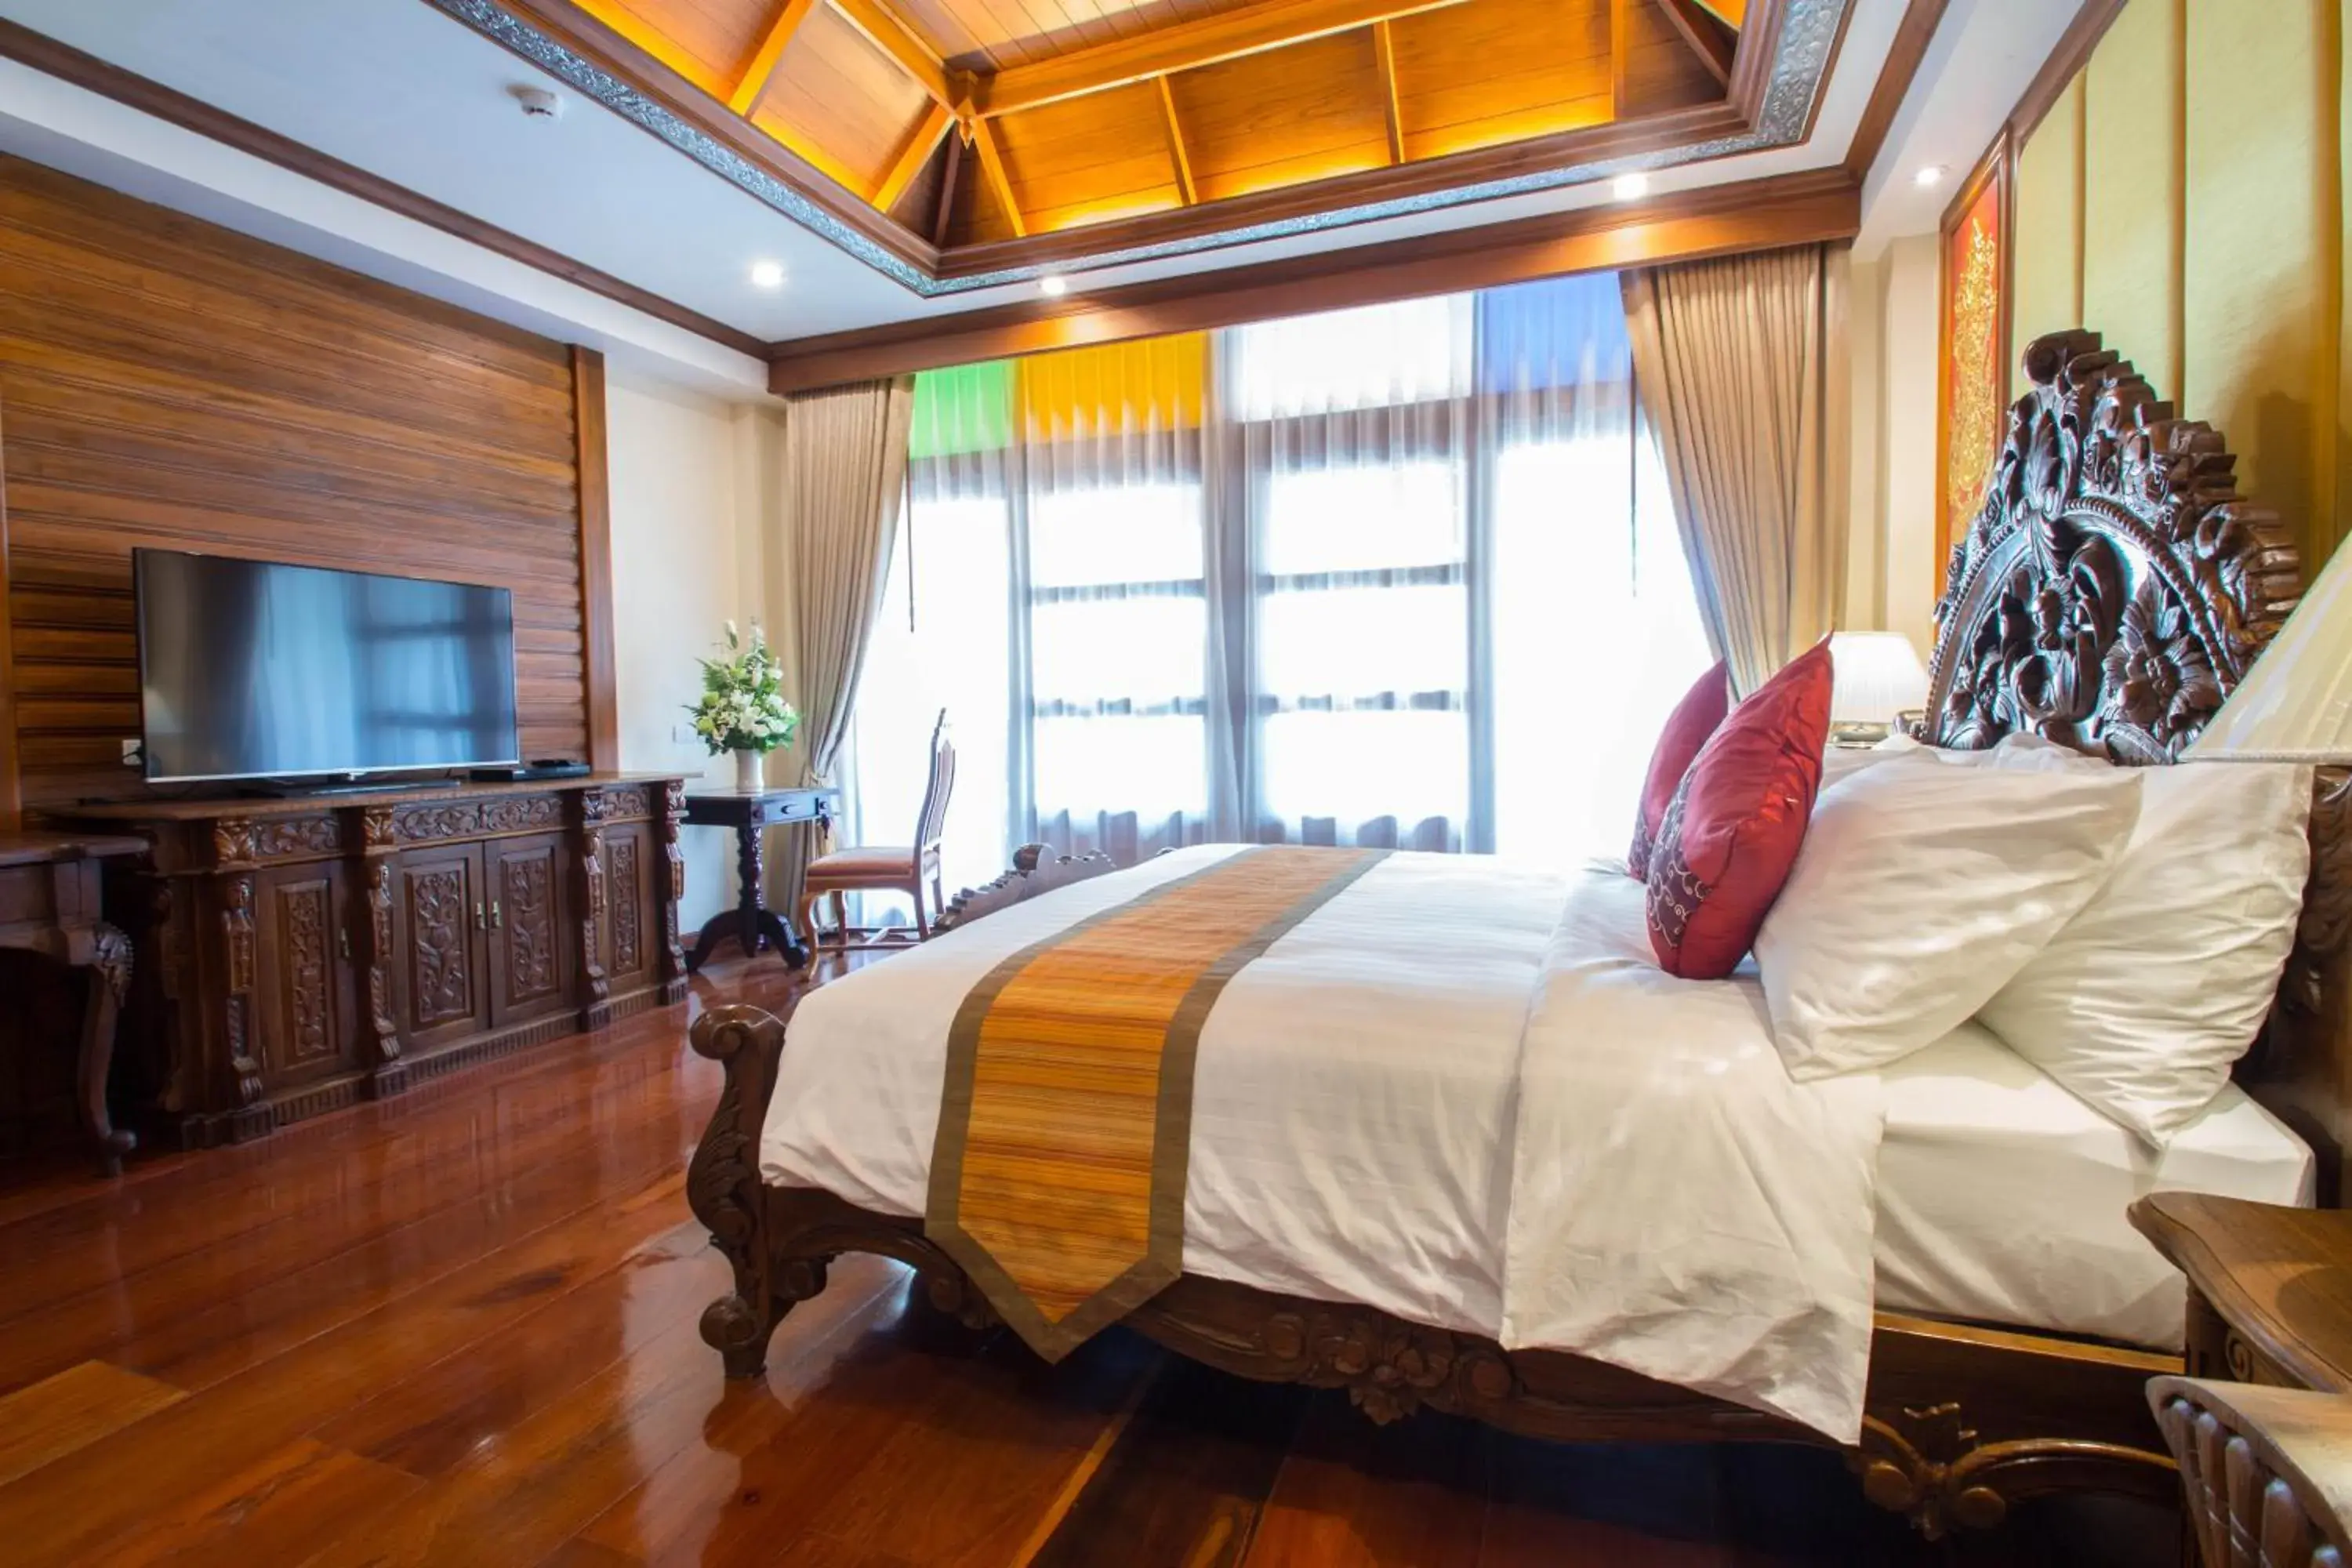 Luxury King Bed with Spa bathtub and Private Balcony in Pingviman Hotel